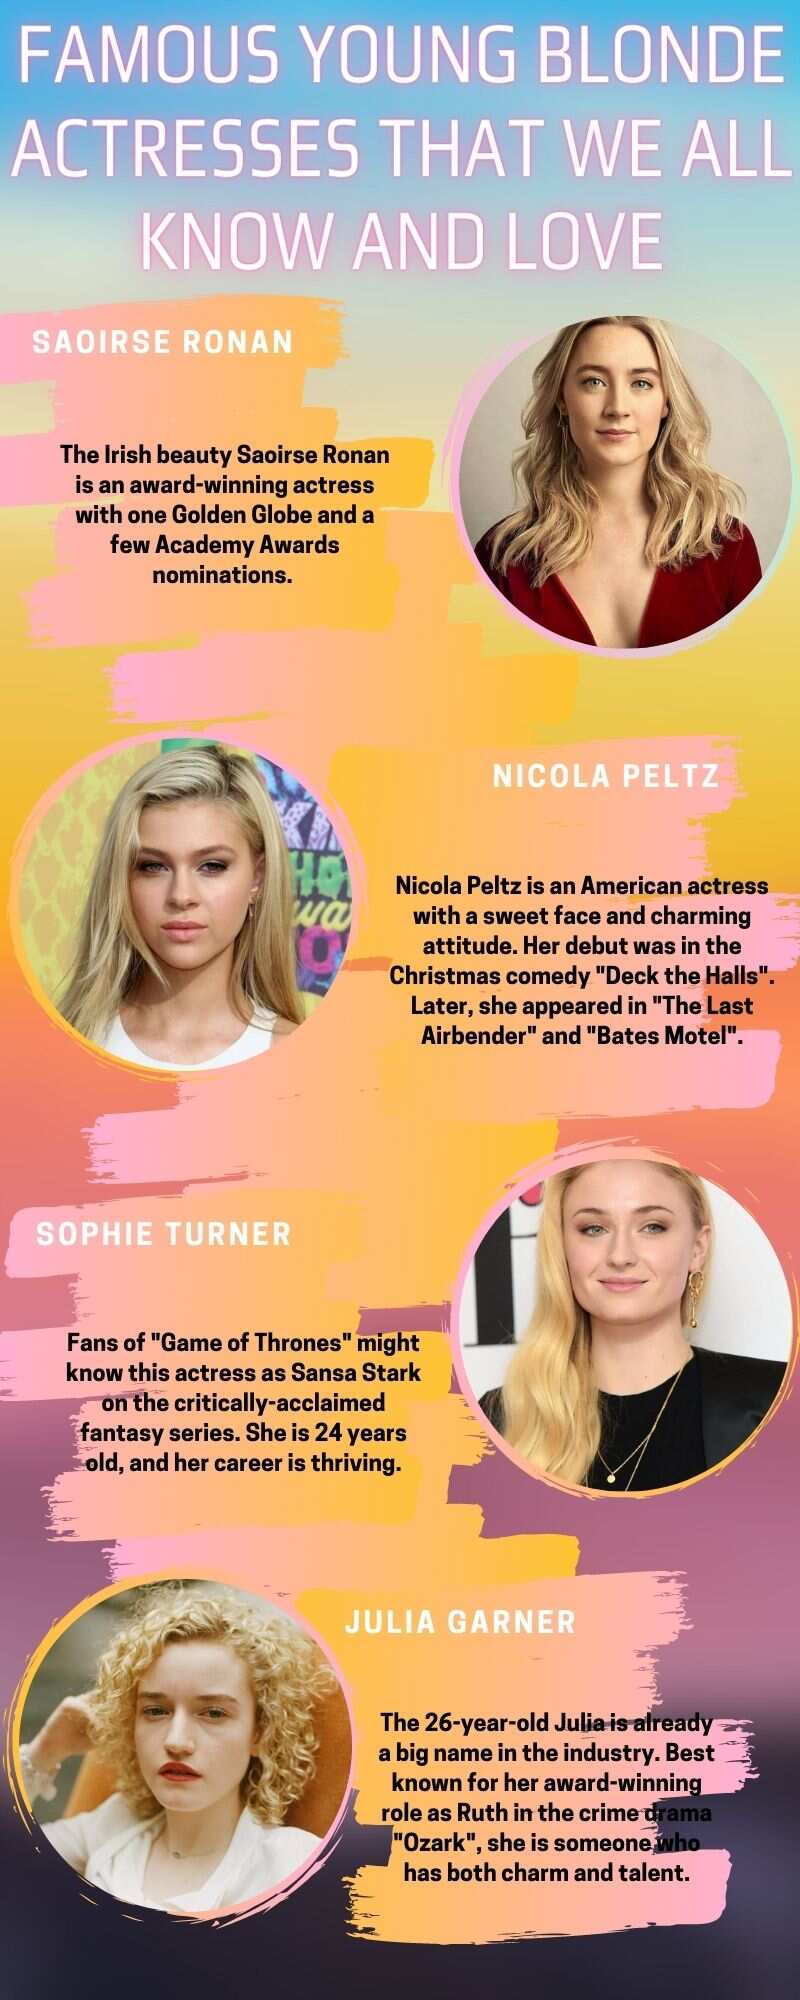 famous young blonde actresses